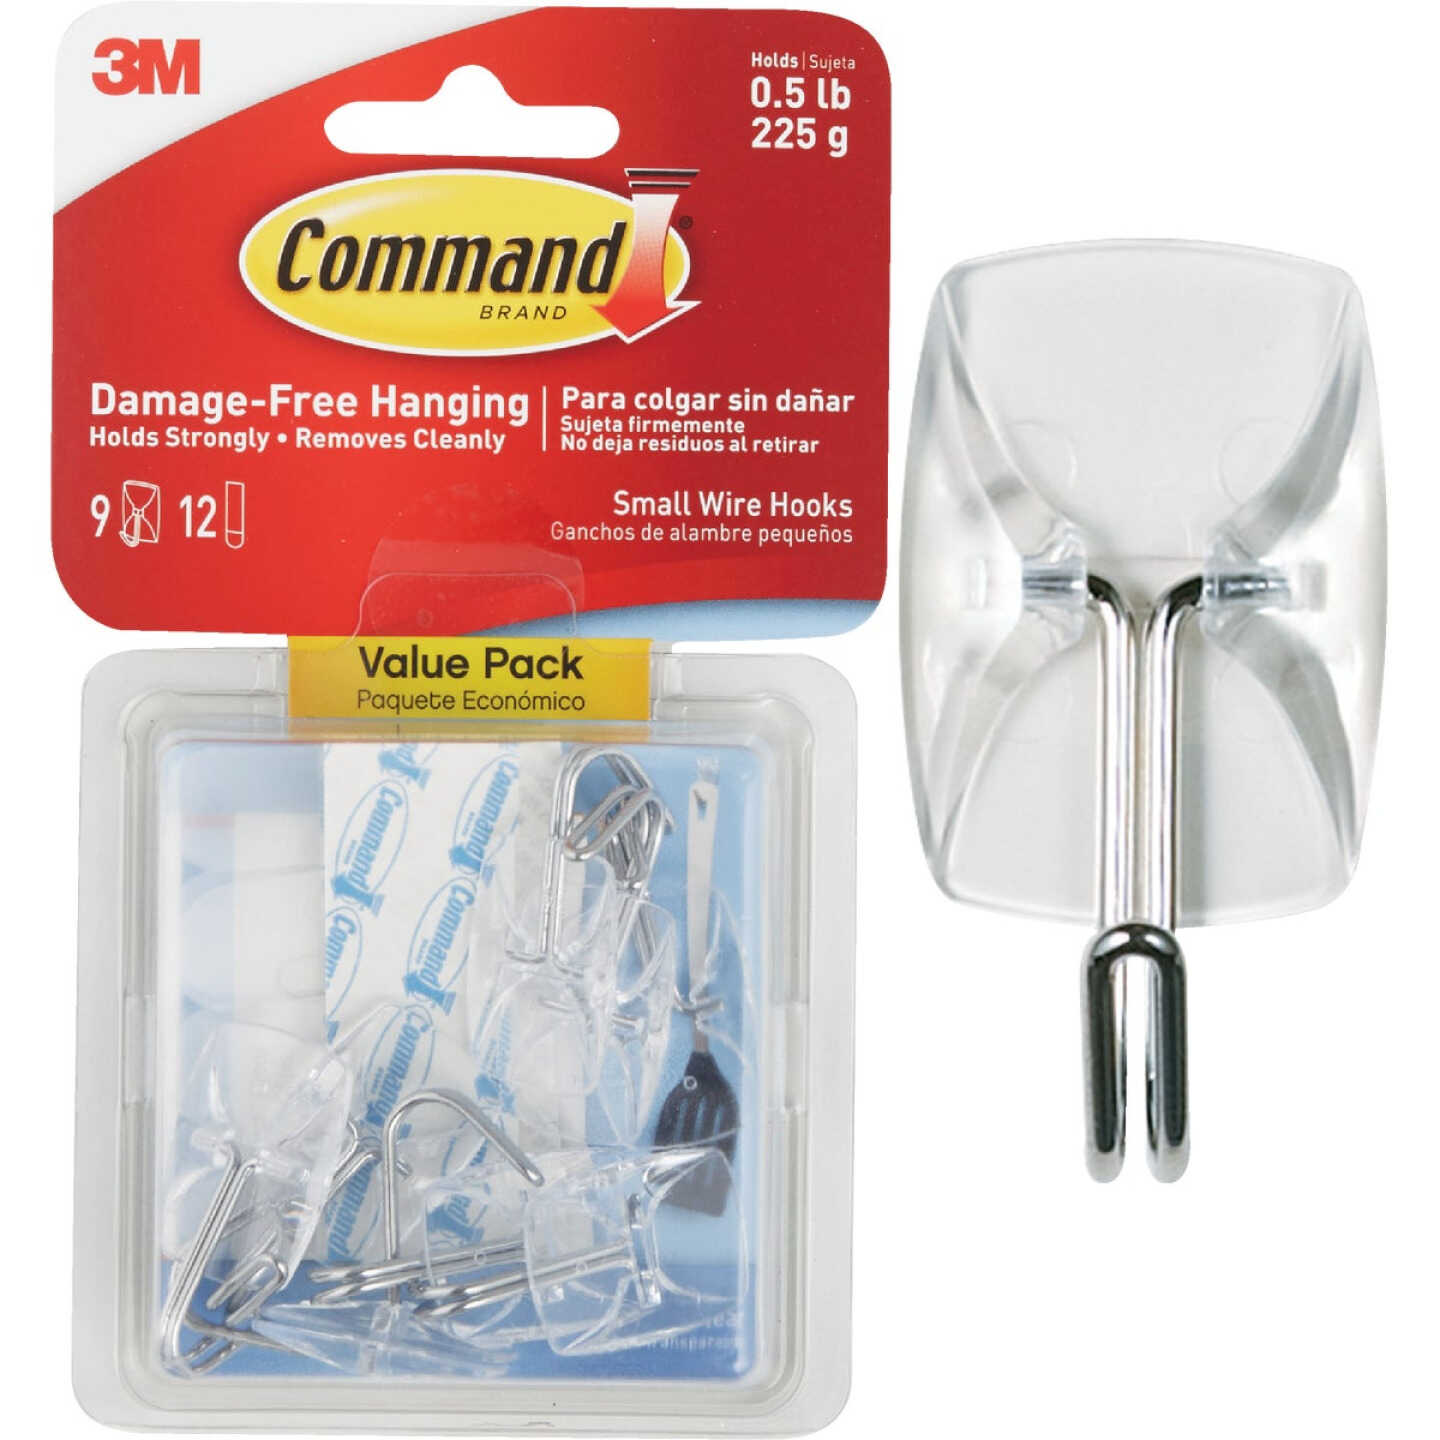 Command Small Wire Hooks, White, Holds up to 0.5 lbs, 4-Hooks, 5-Strips